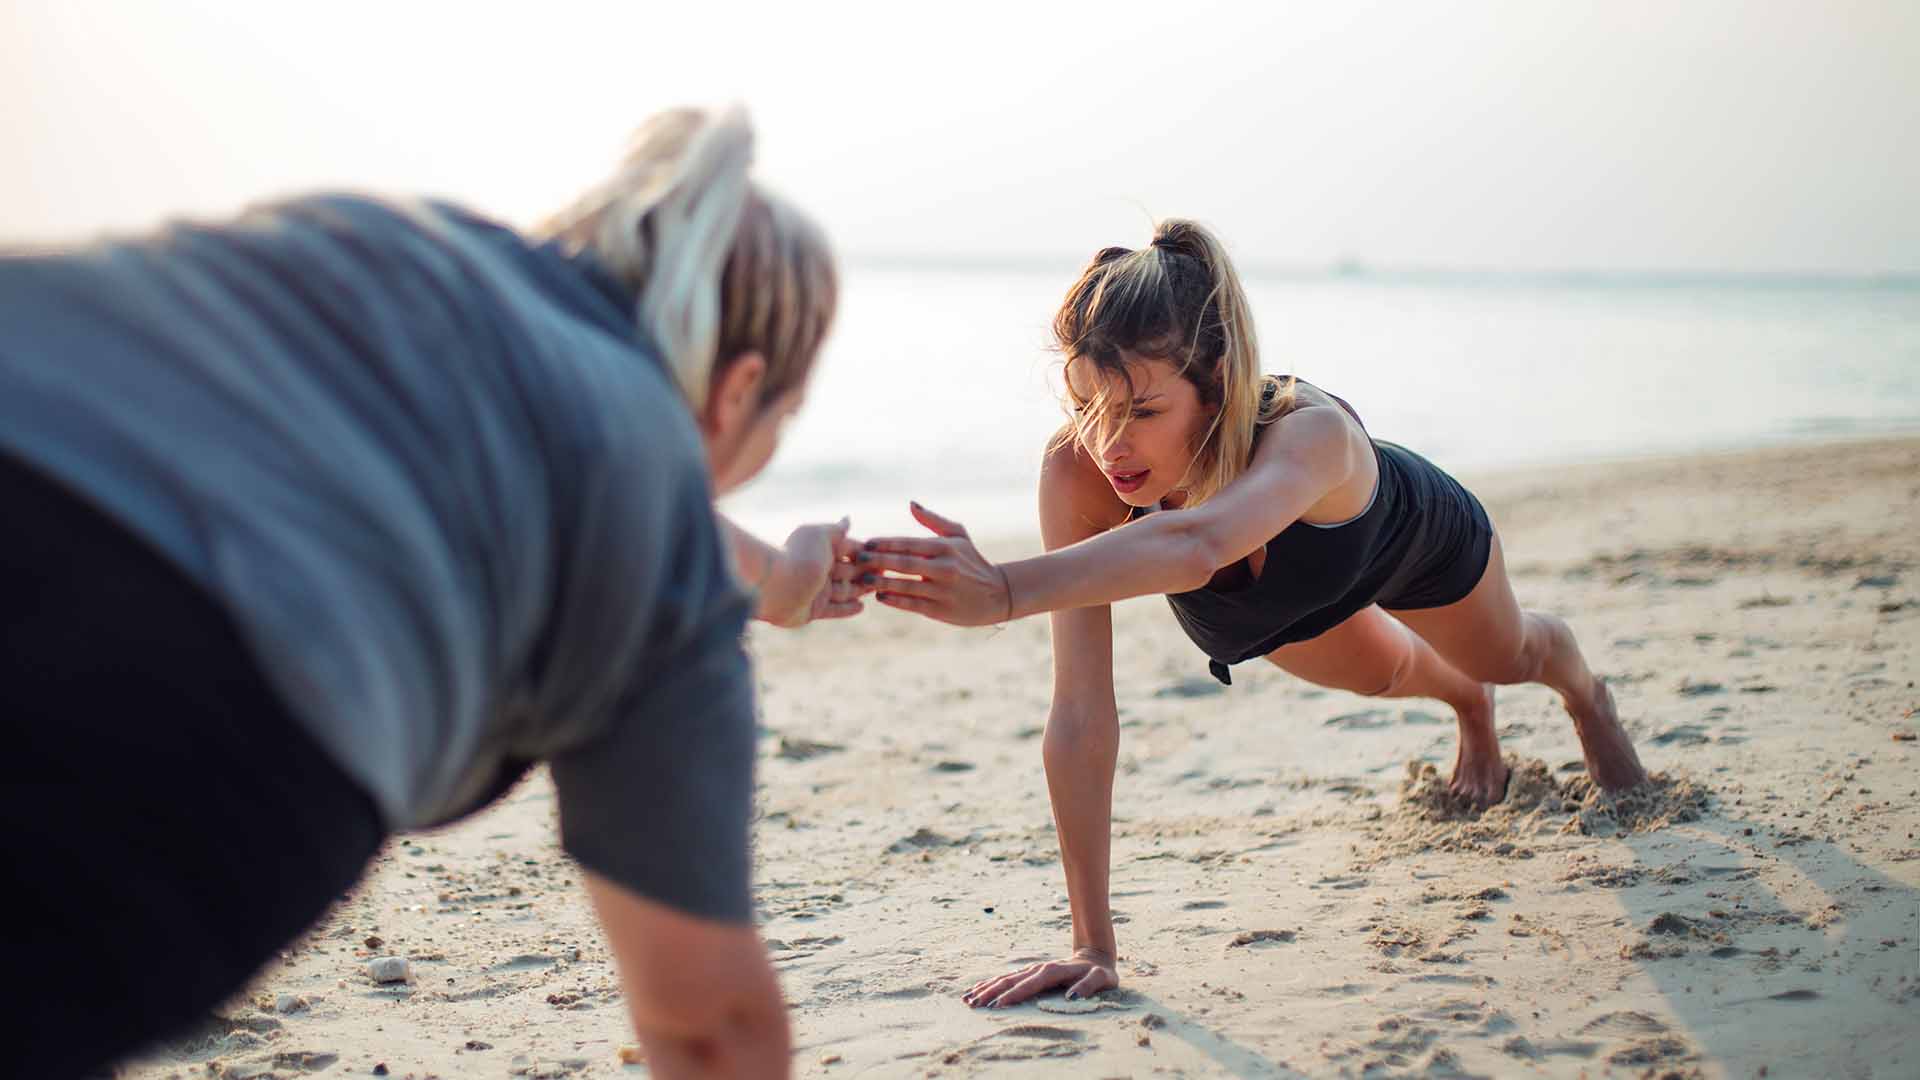 Two beautiful girls working out together on the beach